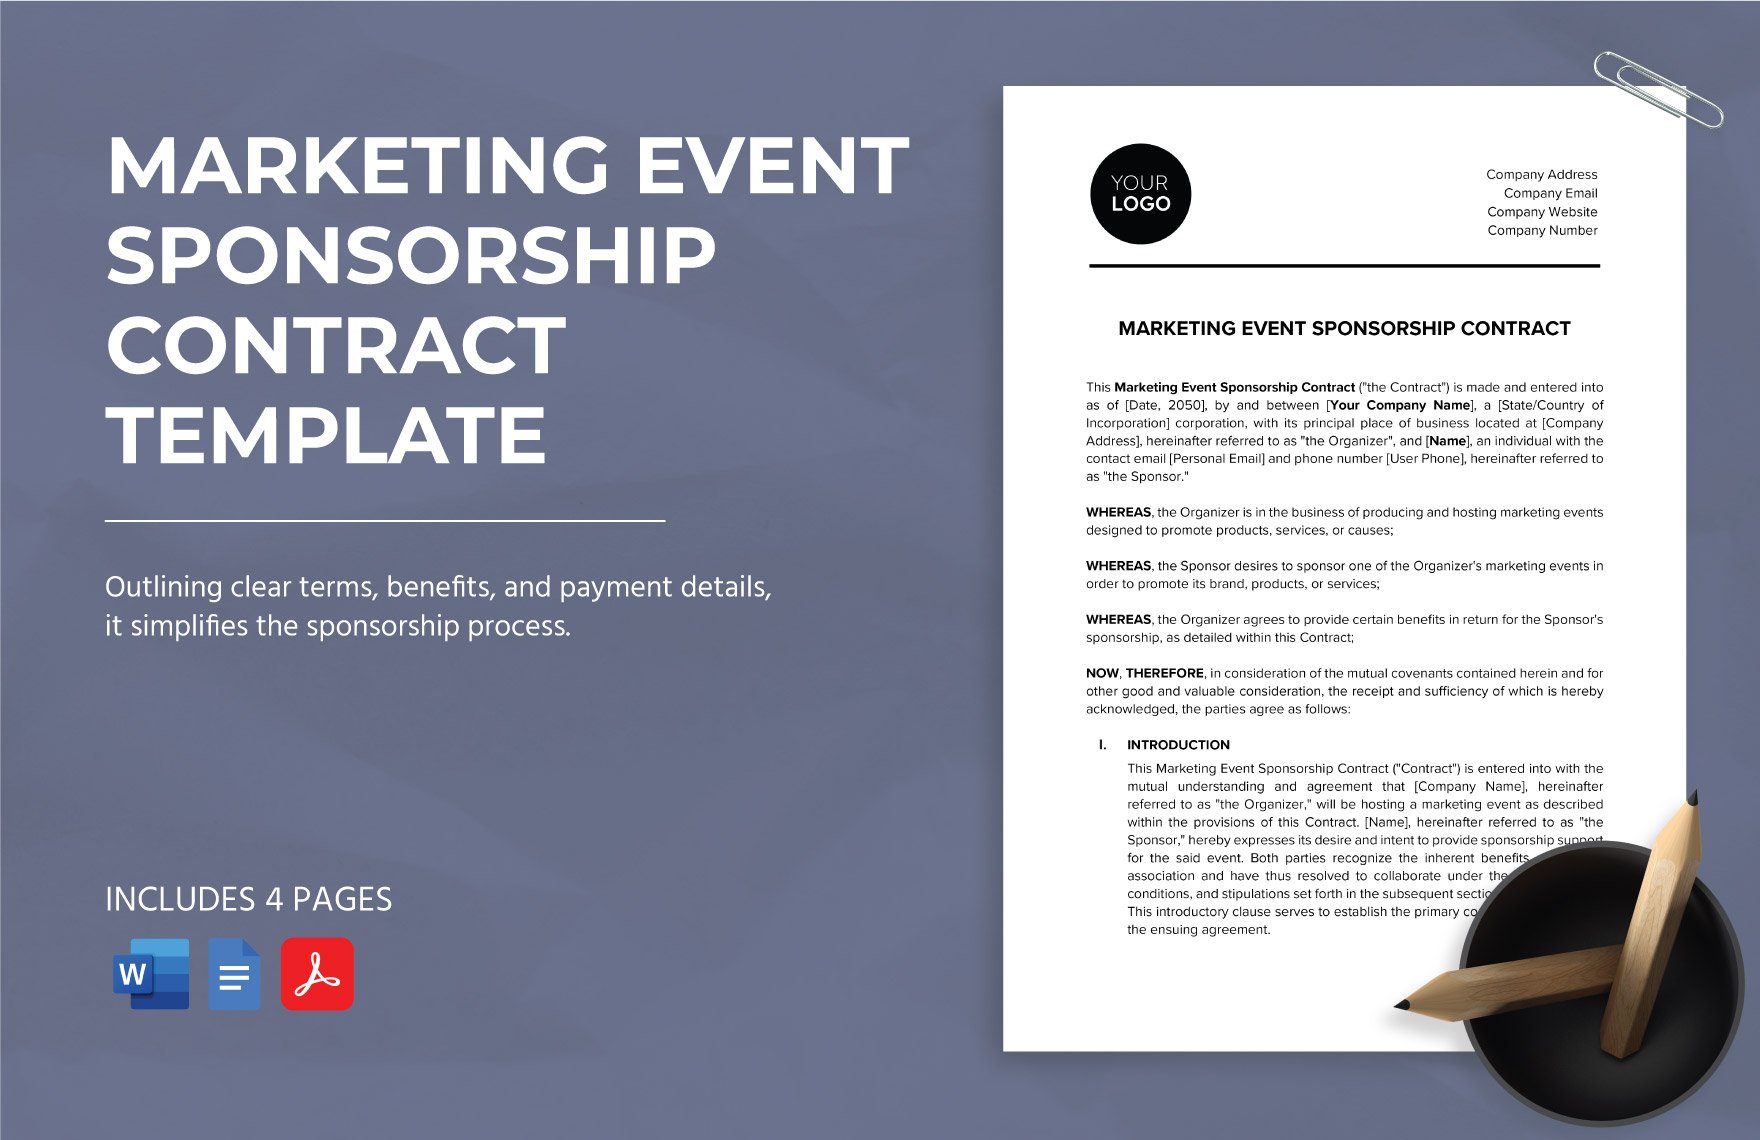 Marketing Event Sponsorship Contract Template in Word, Google Docs, PDF